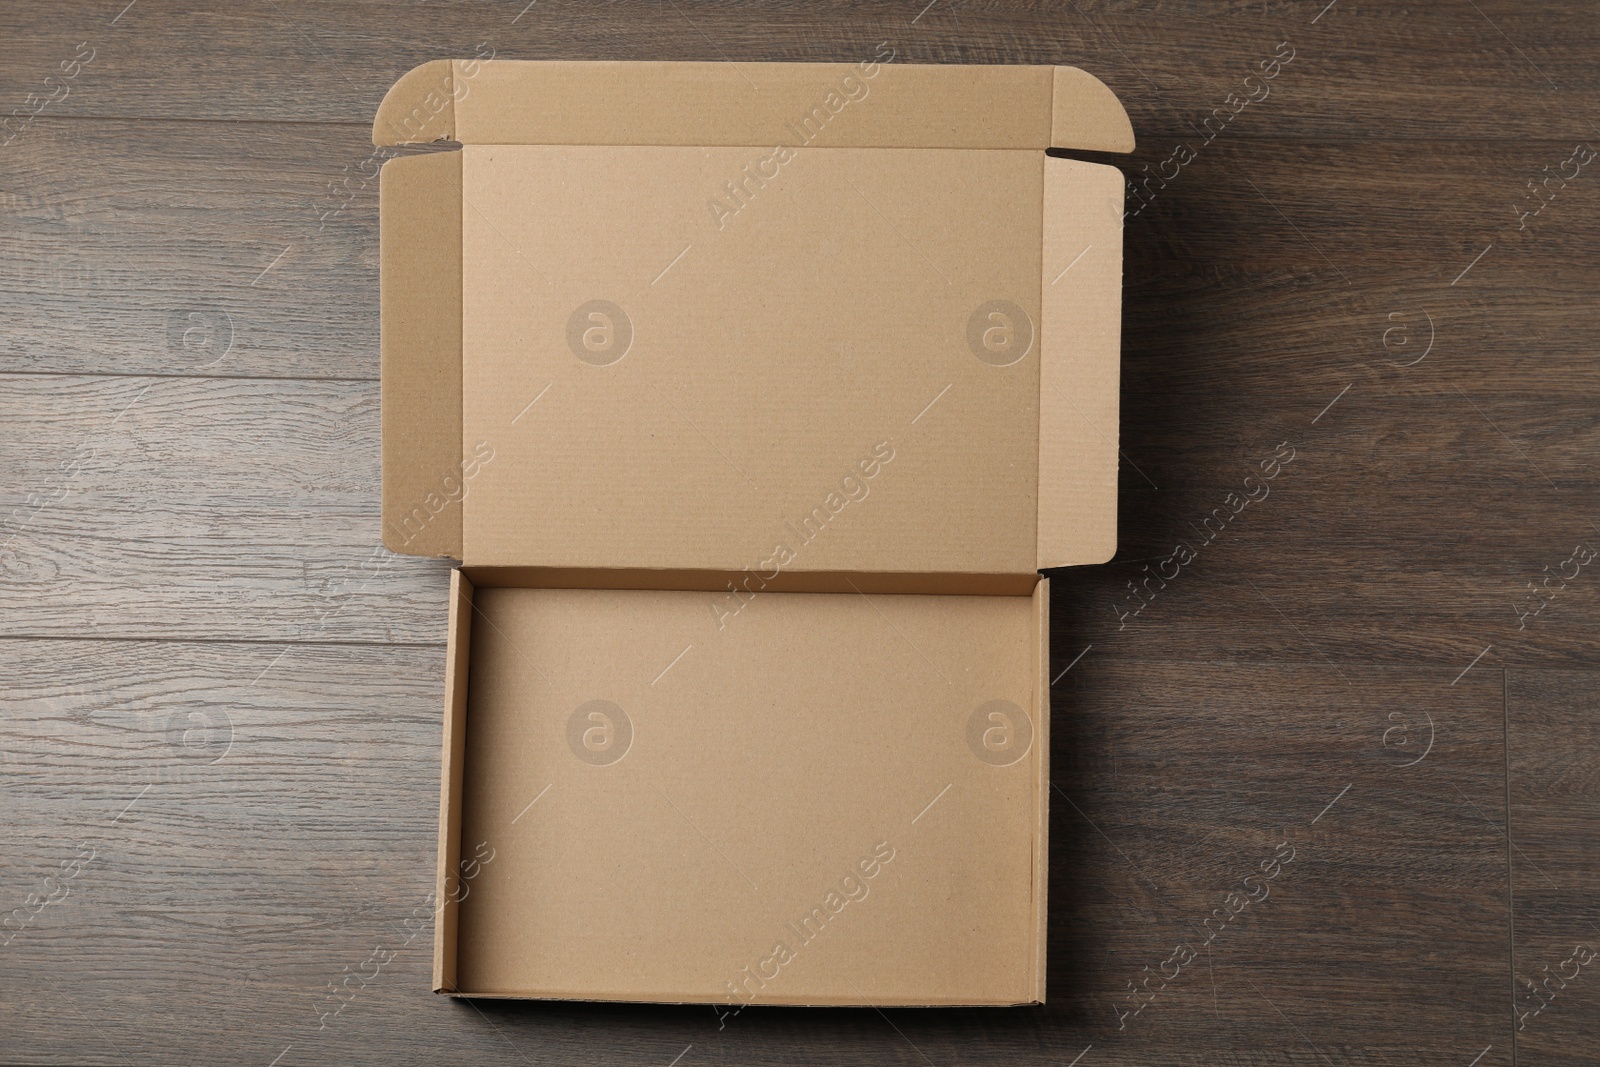 Photo of Empty open cardboard box on wooden table, top view